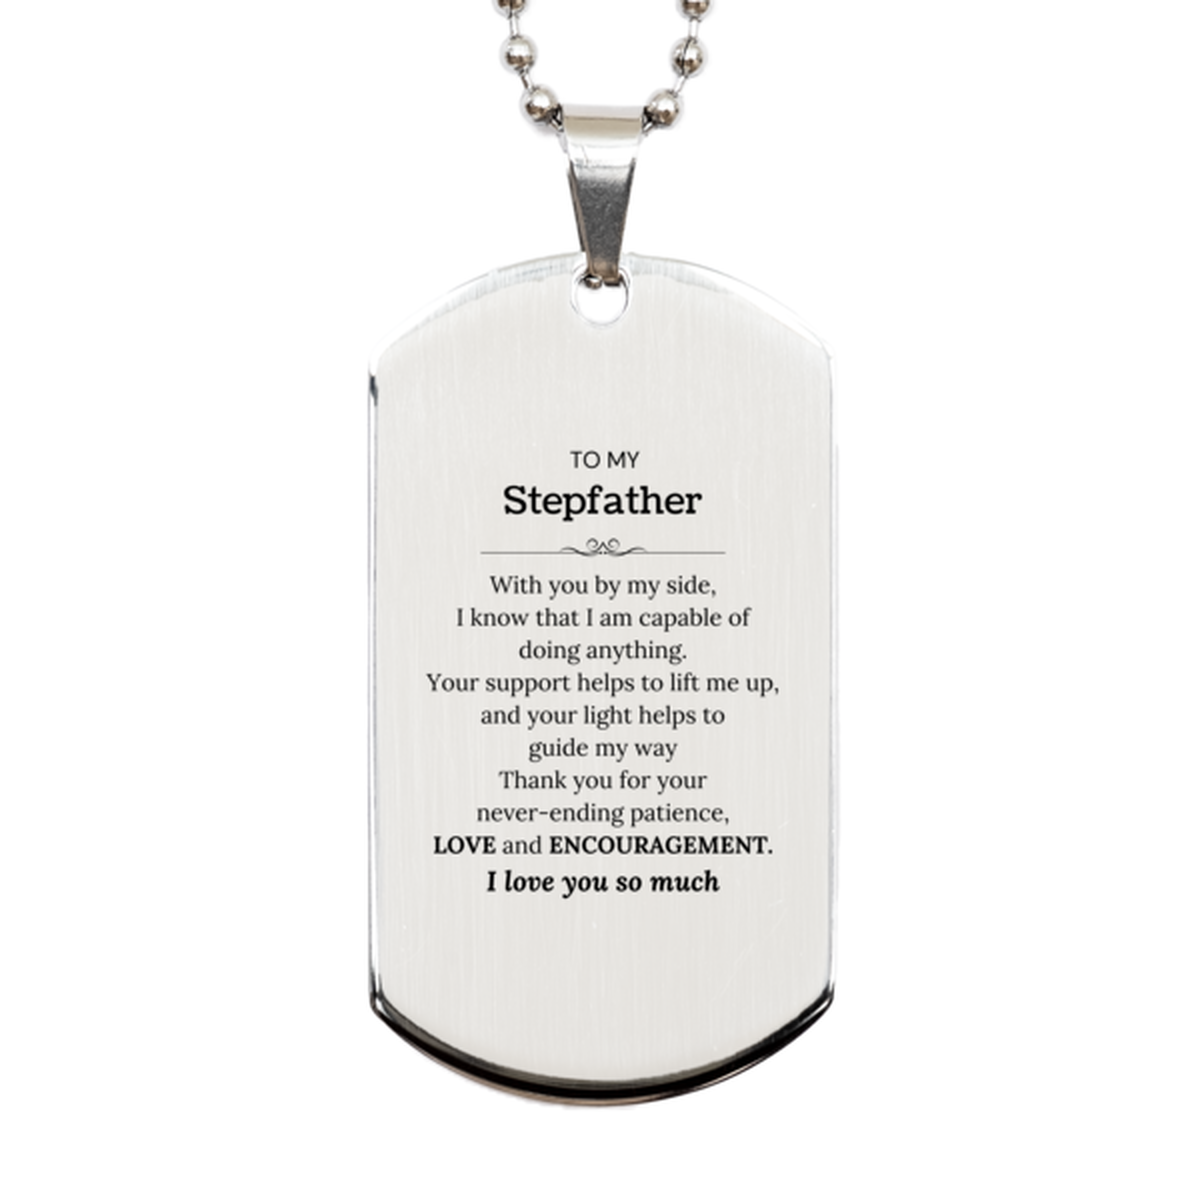 Appreciation Stepfather Silver Dog Tag Gifts, To My Stepfather Birthday Christmas Wedding Keepsake Gifts for Stepfather With you by my side, I know that I am capable of doing anything. I love you so much